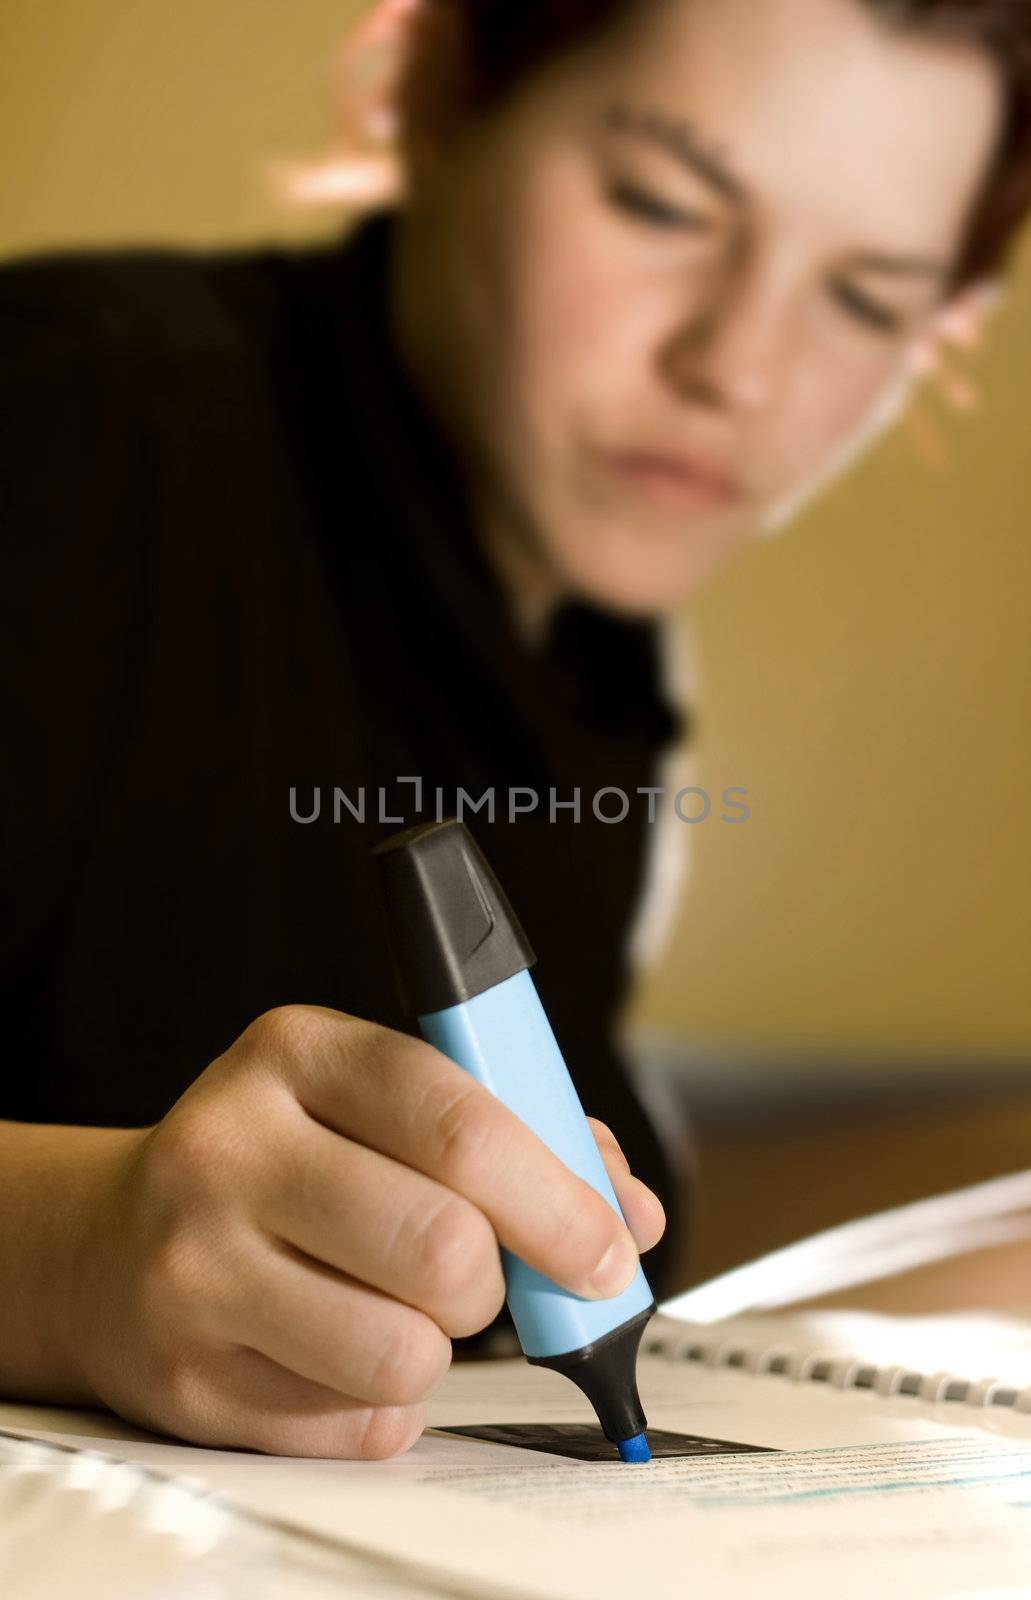 Simple non artificial shot of a student studying or doing work at home.

Shot with studio strobes indoors.